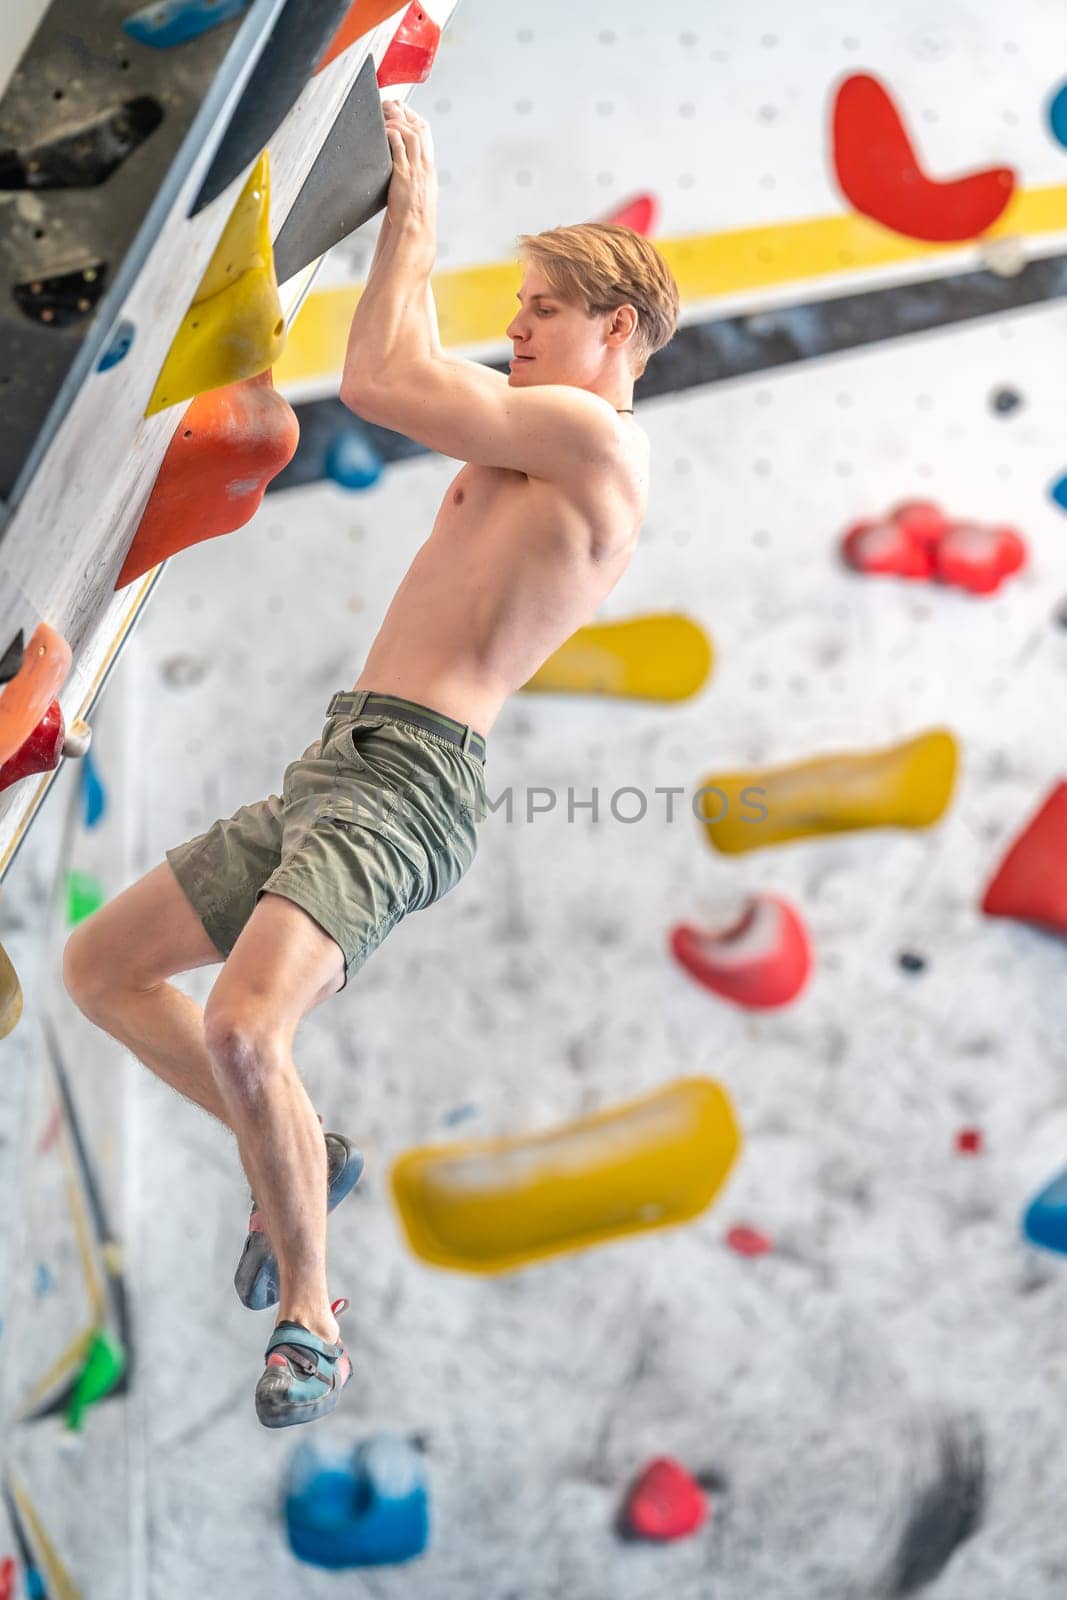 climbing on a boulder wall in a climbing center by Edophoto